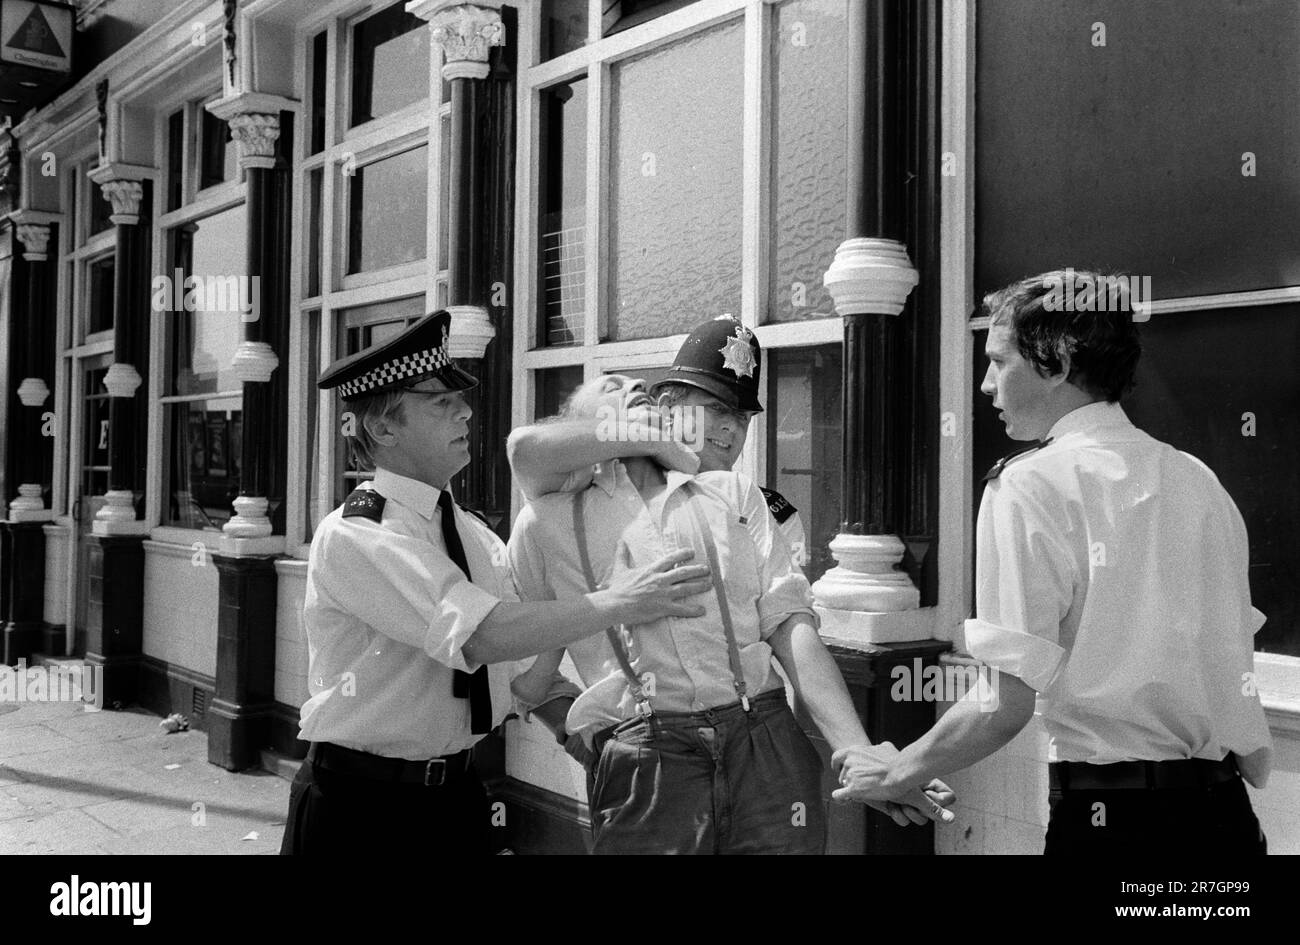 Police arrest a skinhead youth, a supporter of the National Front during a regular Sunday stand off between the Socialist Workers Party and the National Front at the north end of Brick Lane,  Whitechapel, east London, England circa 1978. 1970s UK HOMER SYKES Stock Photo